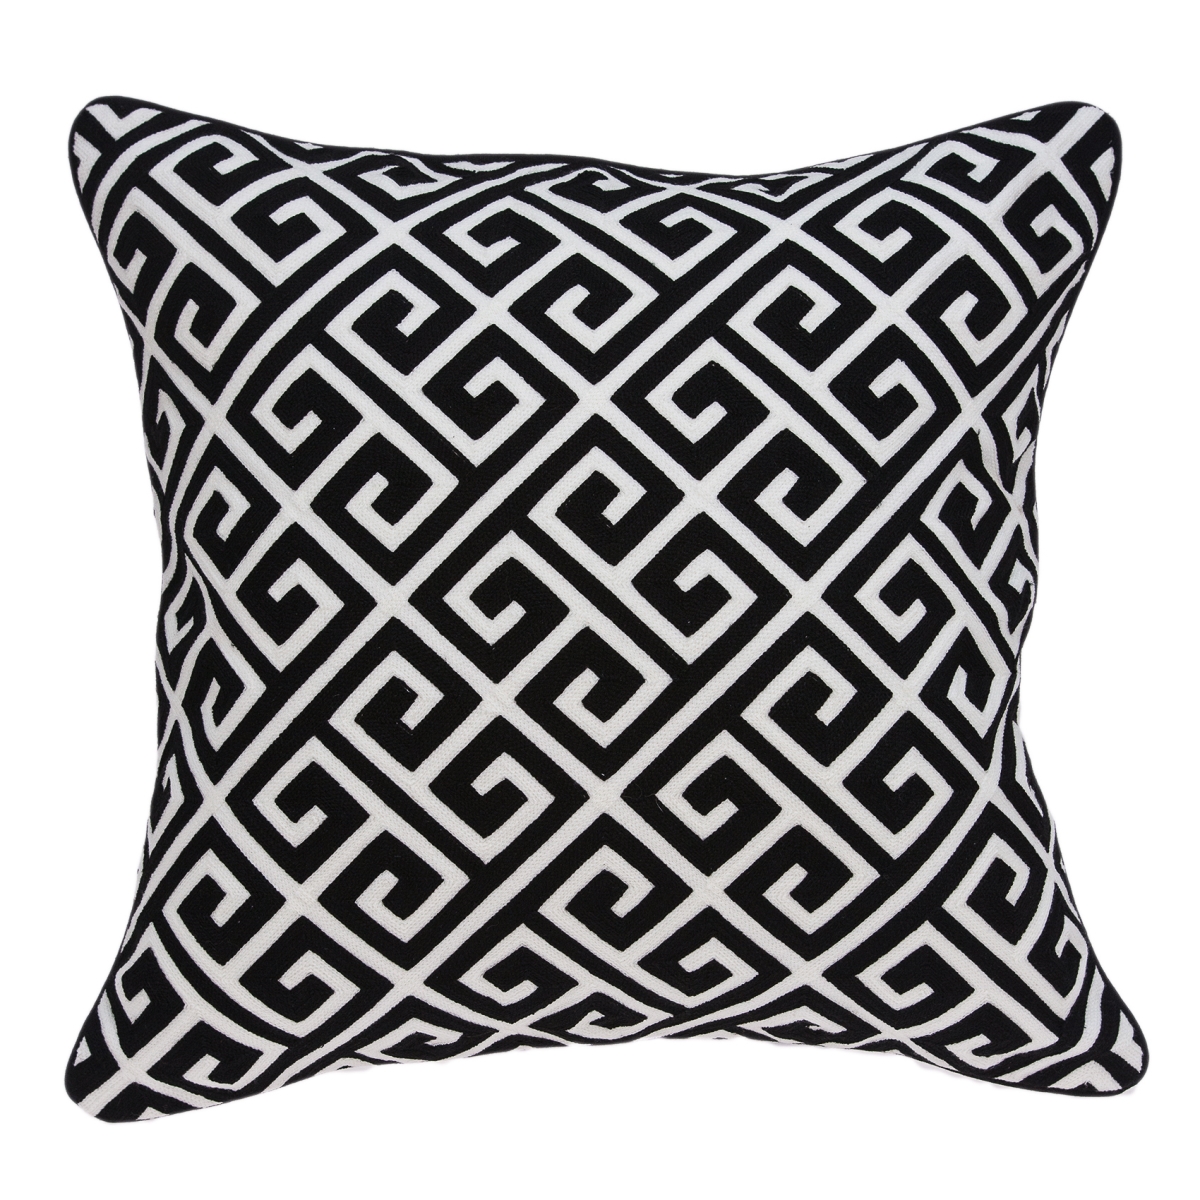 Pila11002d Cameo Black & White Square Transitional Pillow Cover With Down Insert - 20 X 20 X 7 In.